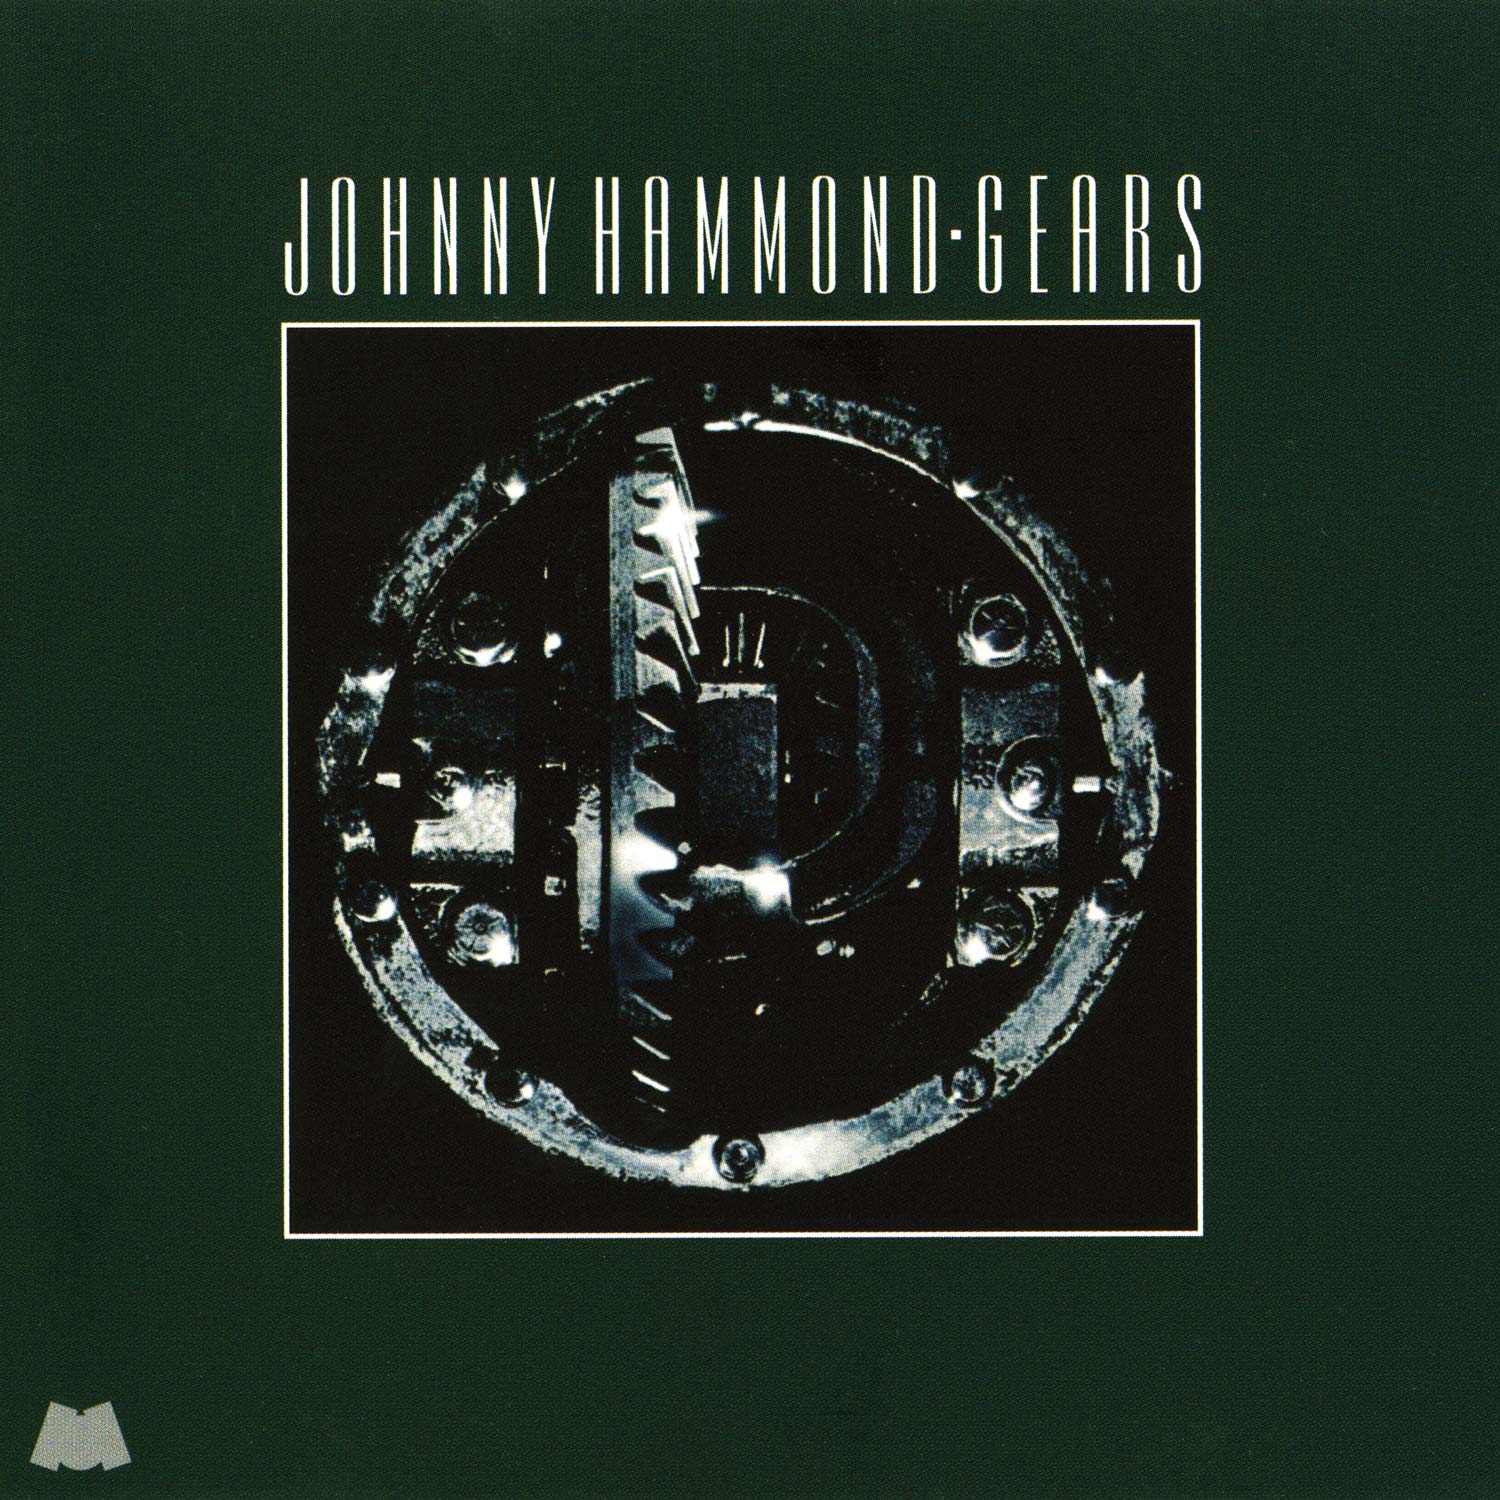 Featured Image for “JOHNNY HAMMOND’S FUSION MASTERPIECE GEARS RETURNS TO VINYL”